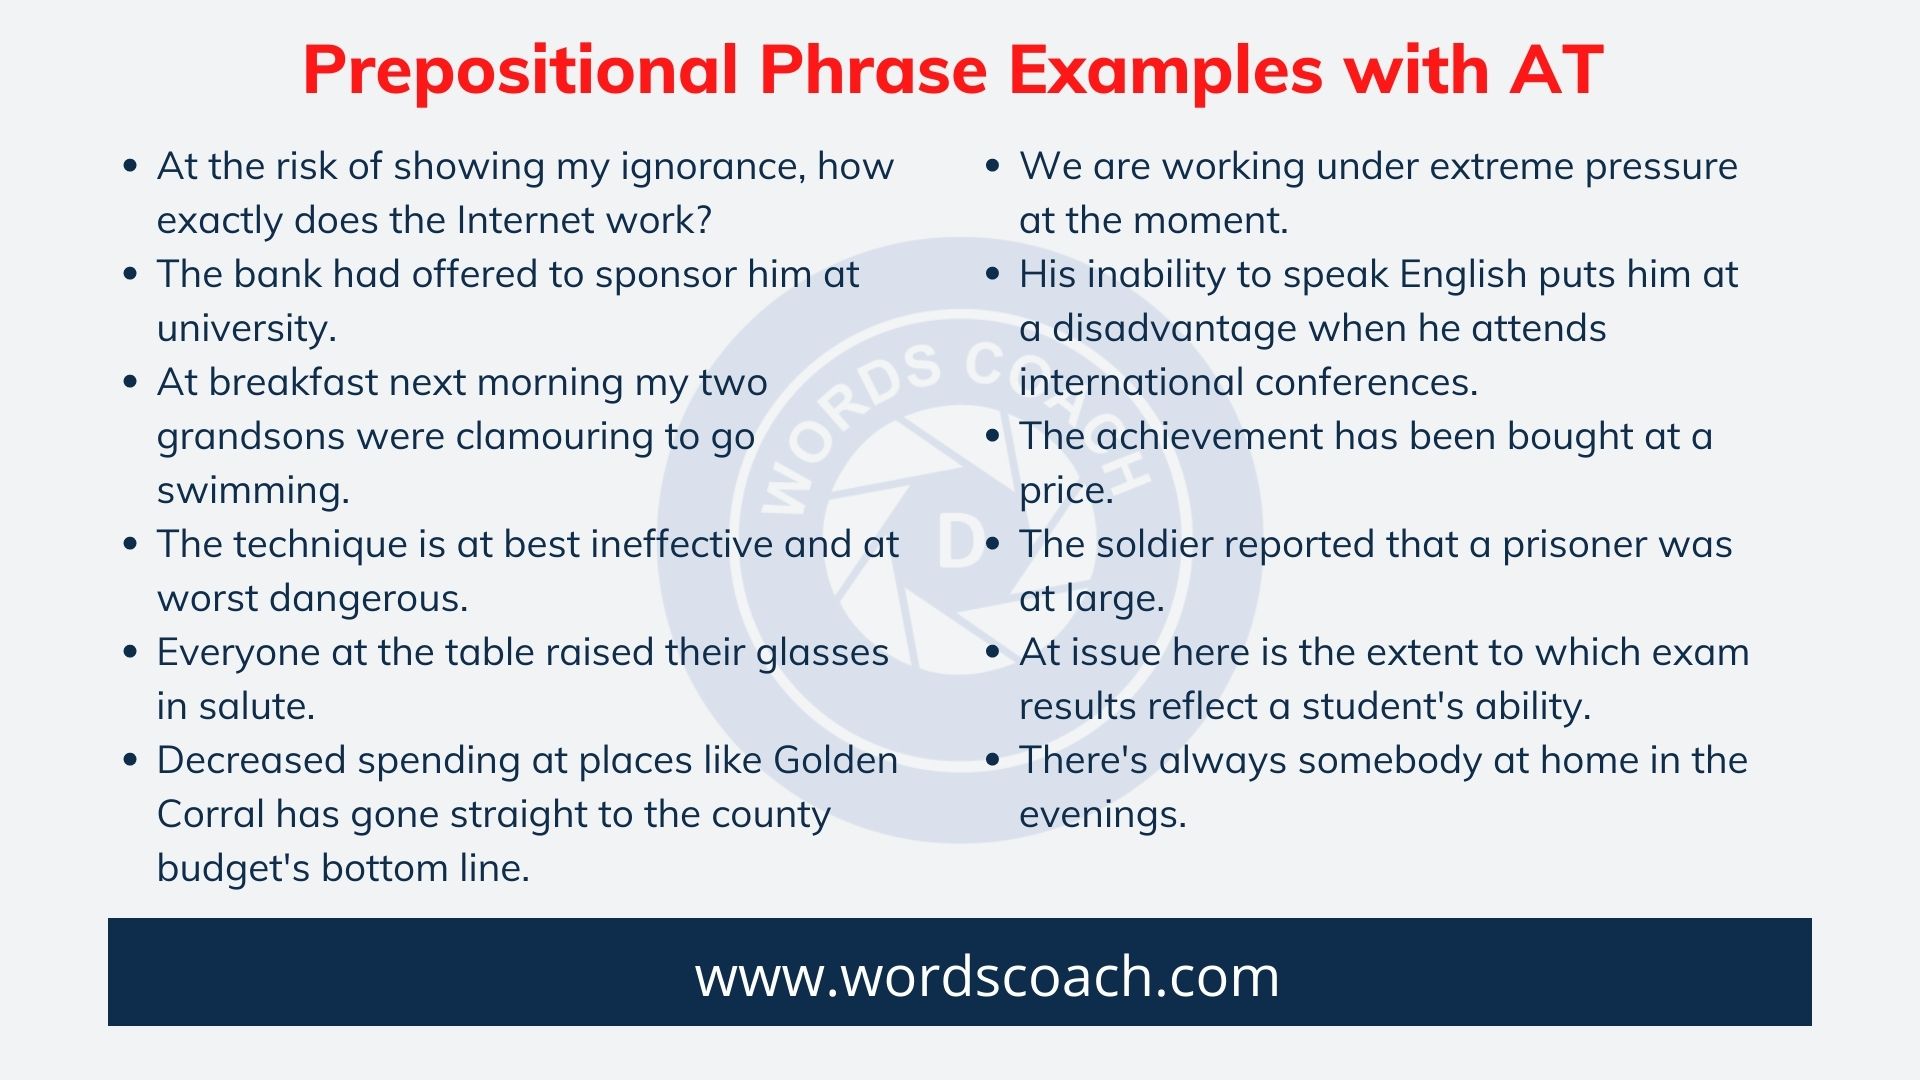 Prepositional Phrase Examples with AT - wordscoach.com